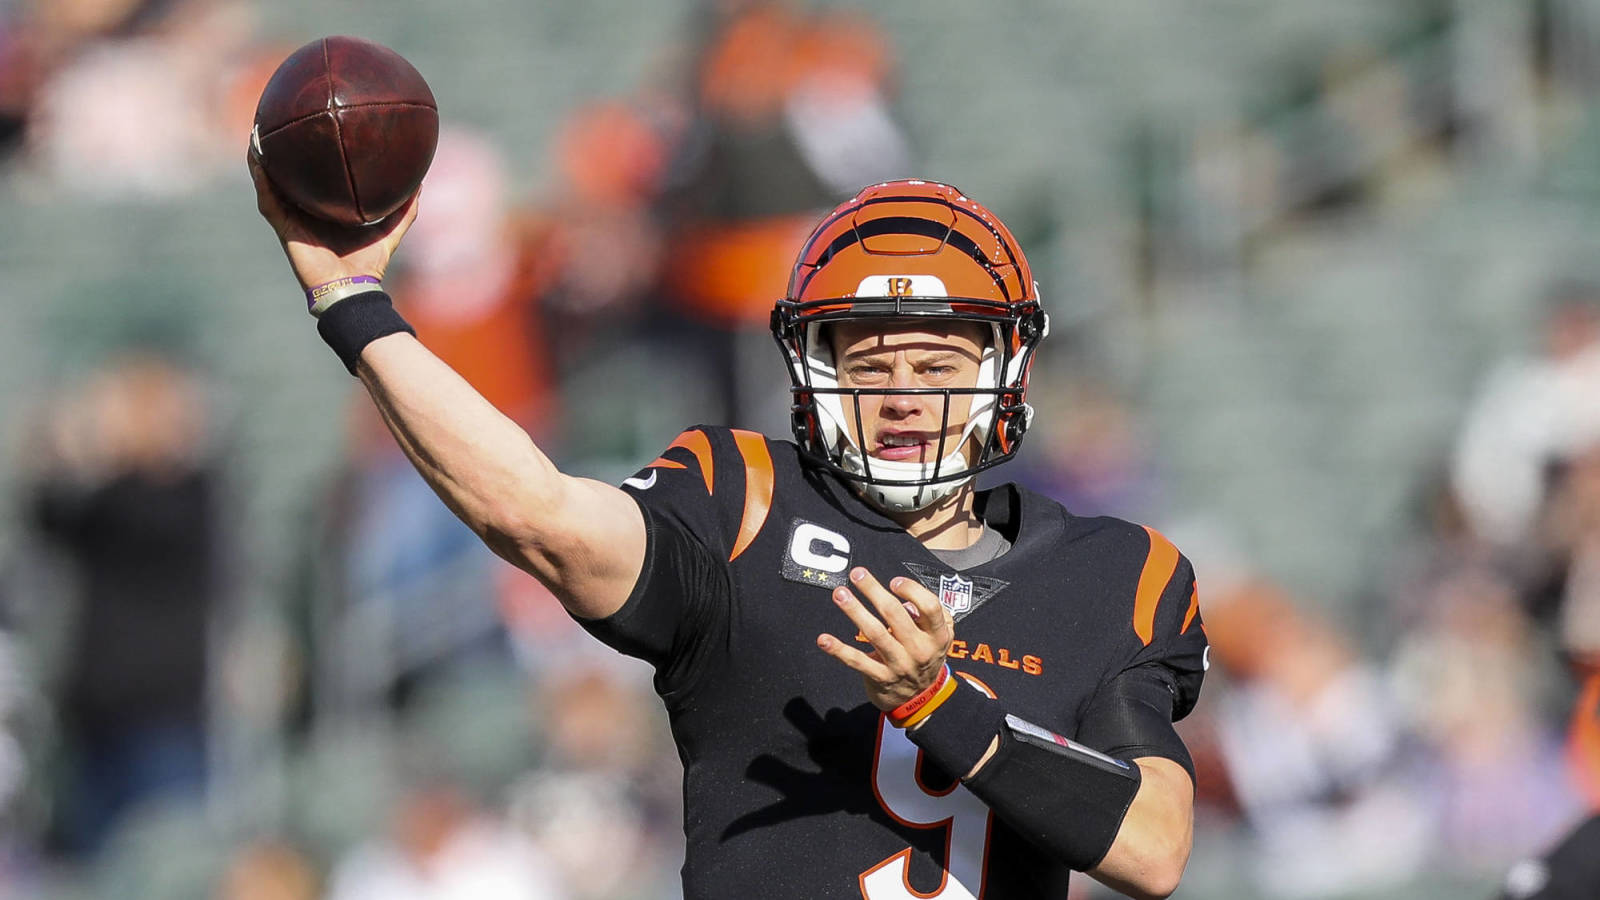 Joe Burrow, Bengals whomp Ravens to pull even in AFC North - The